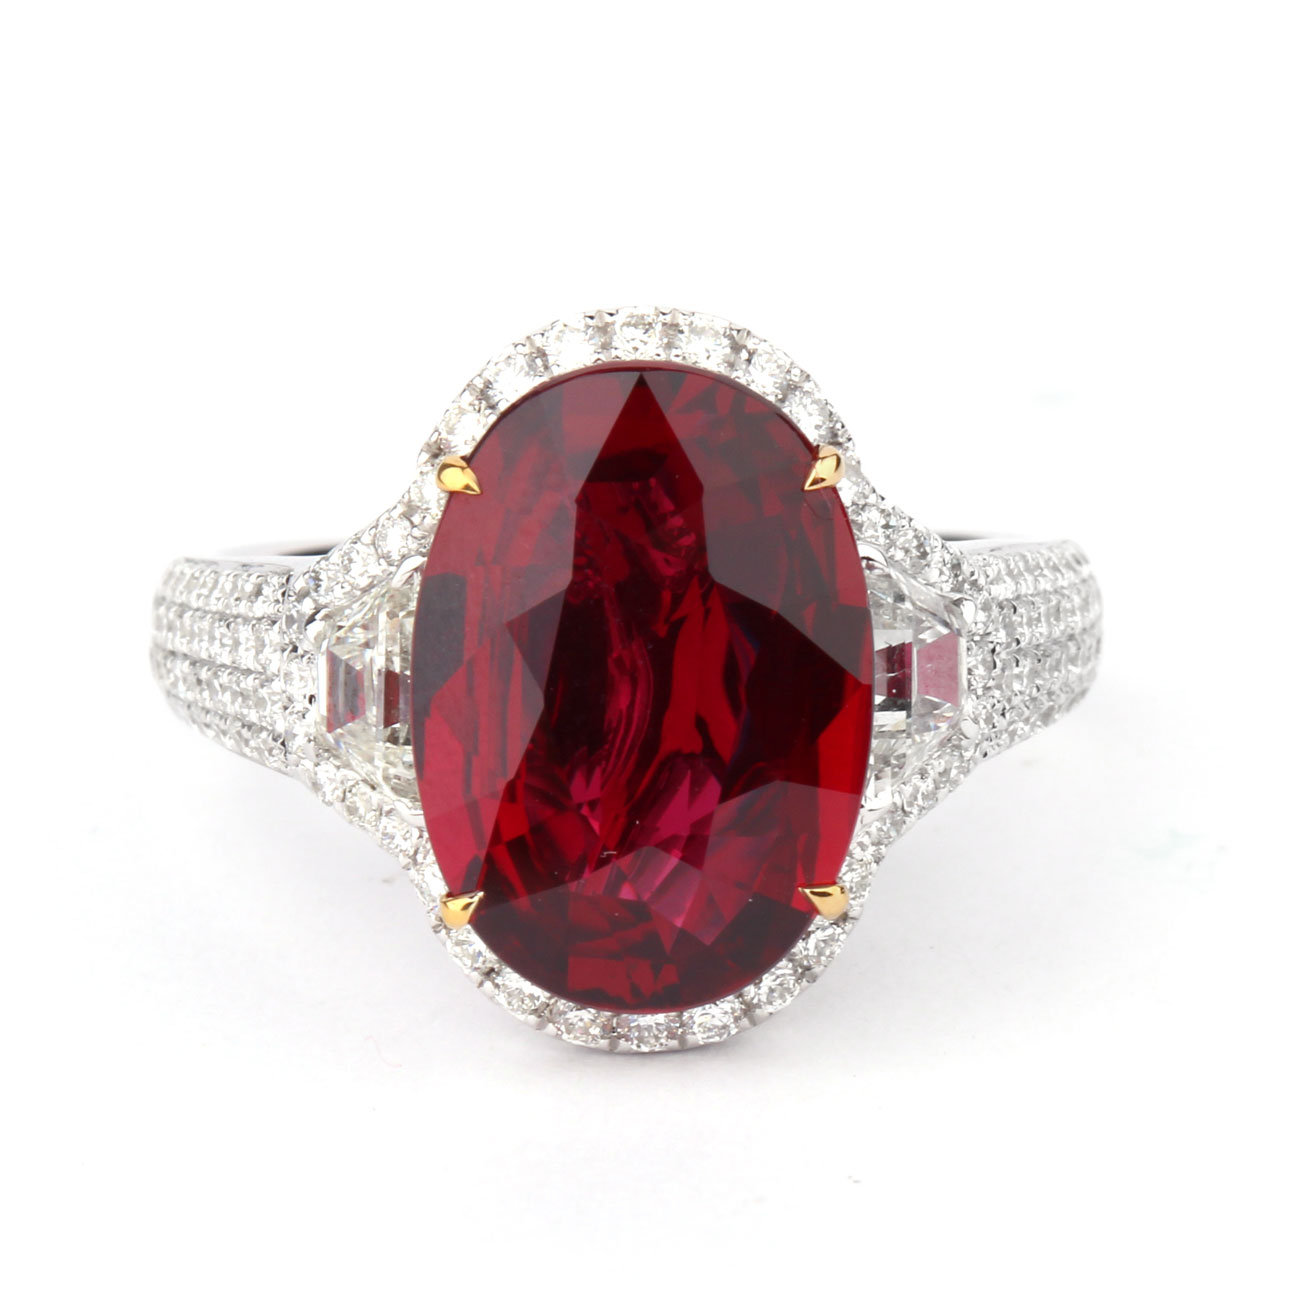 Here's What You Need to Keep in Mind While Buying A 1 Carat Ruby